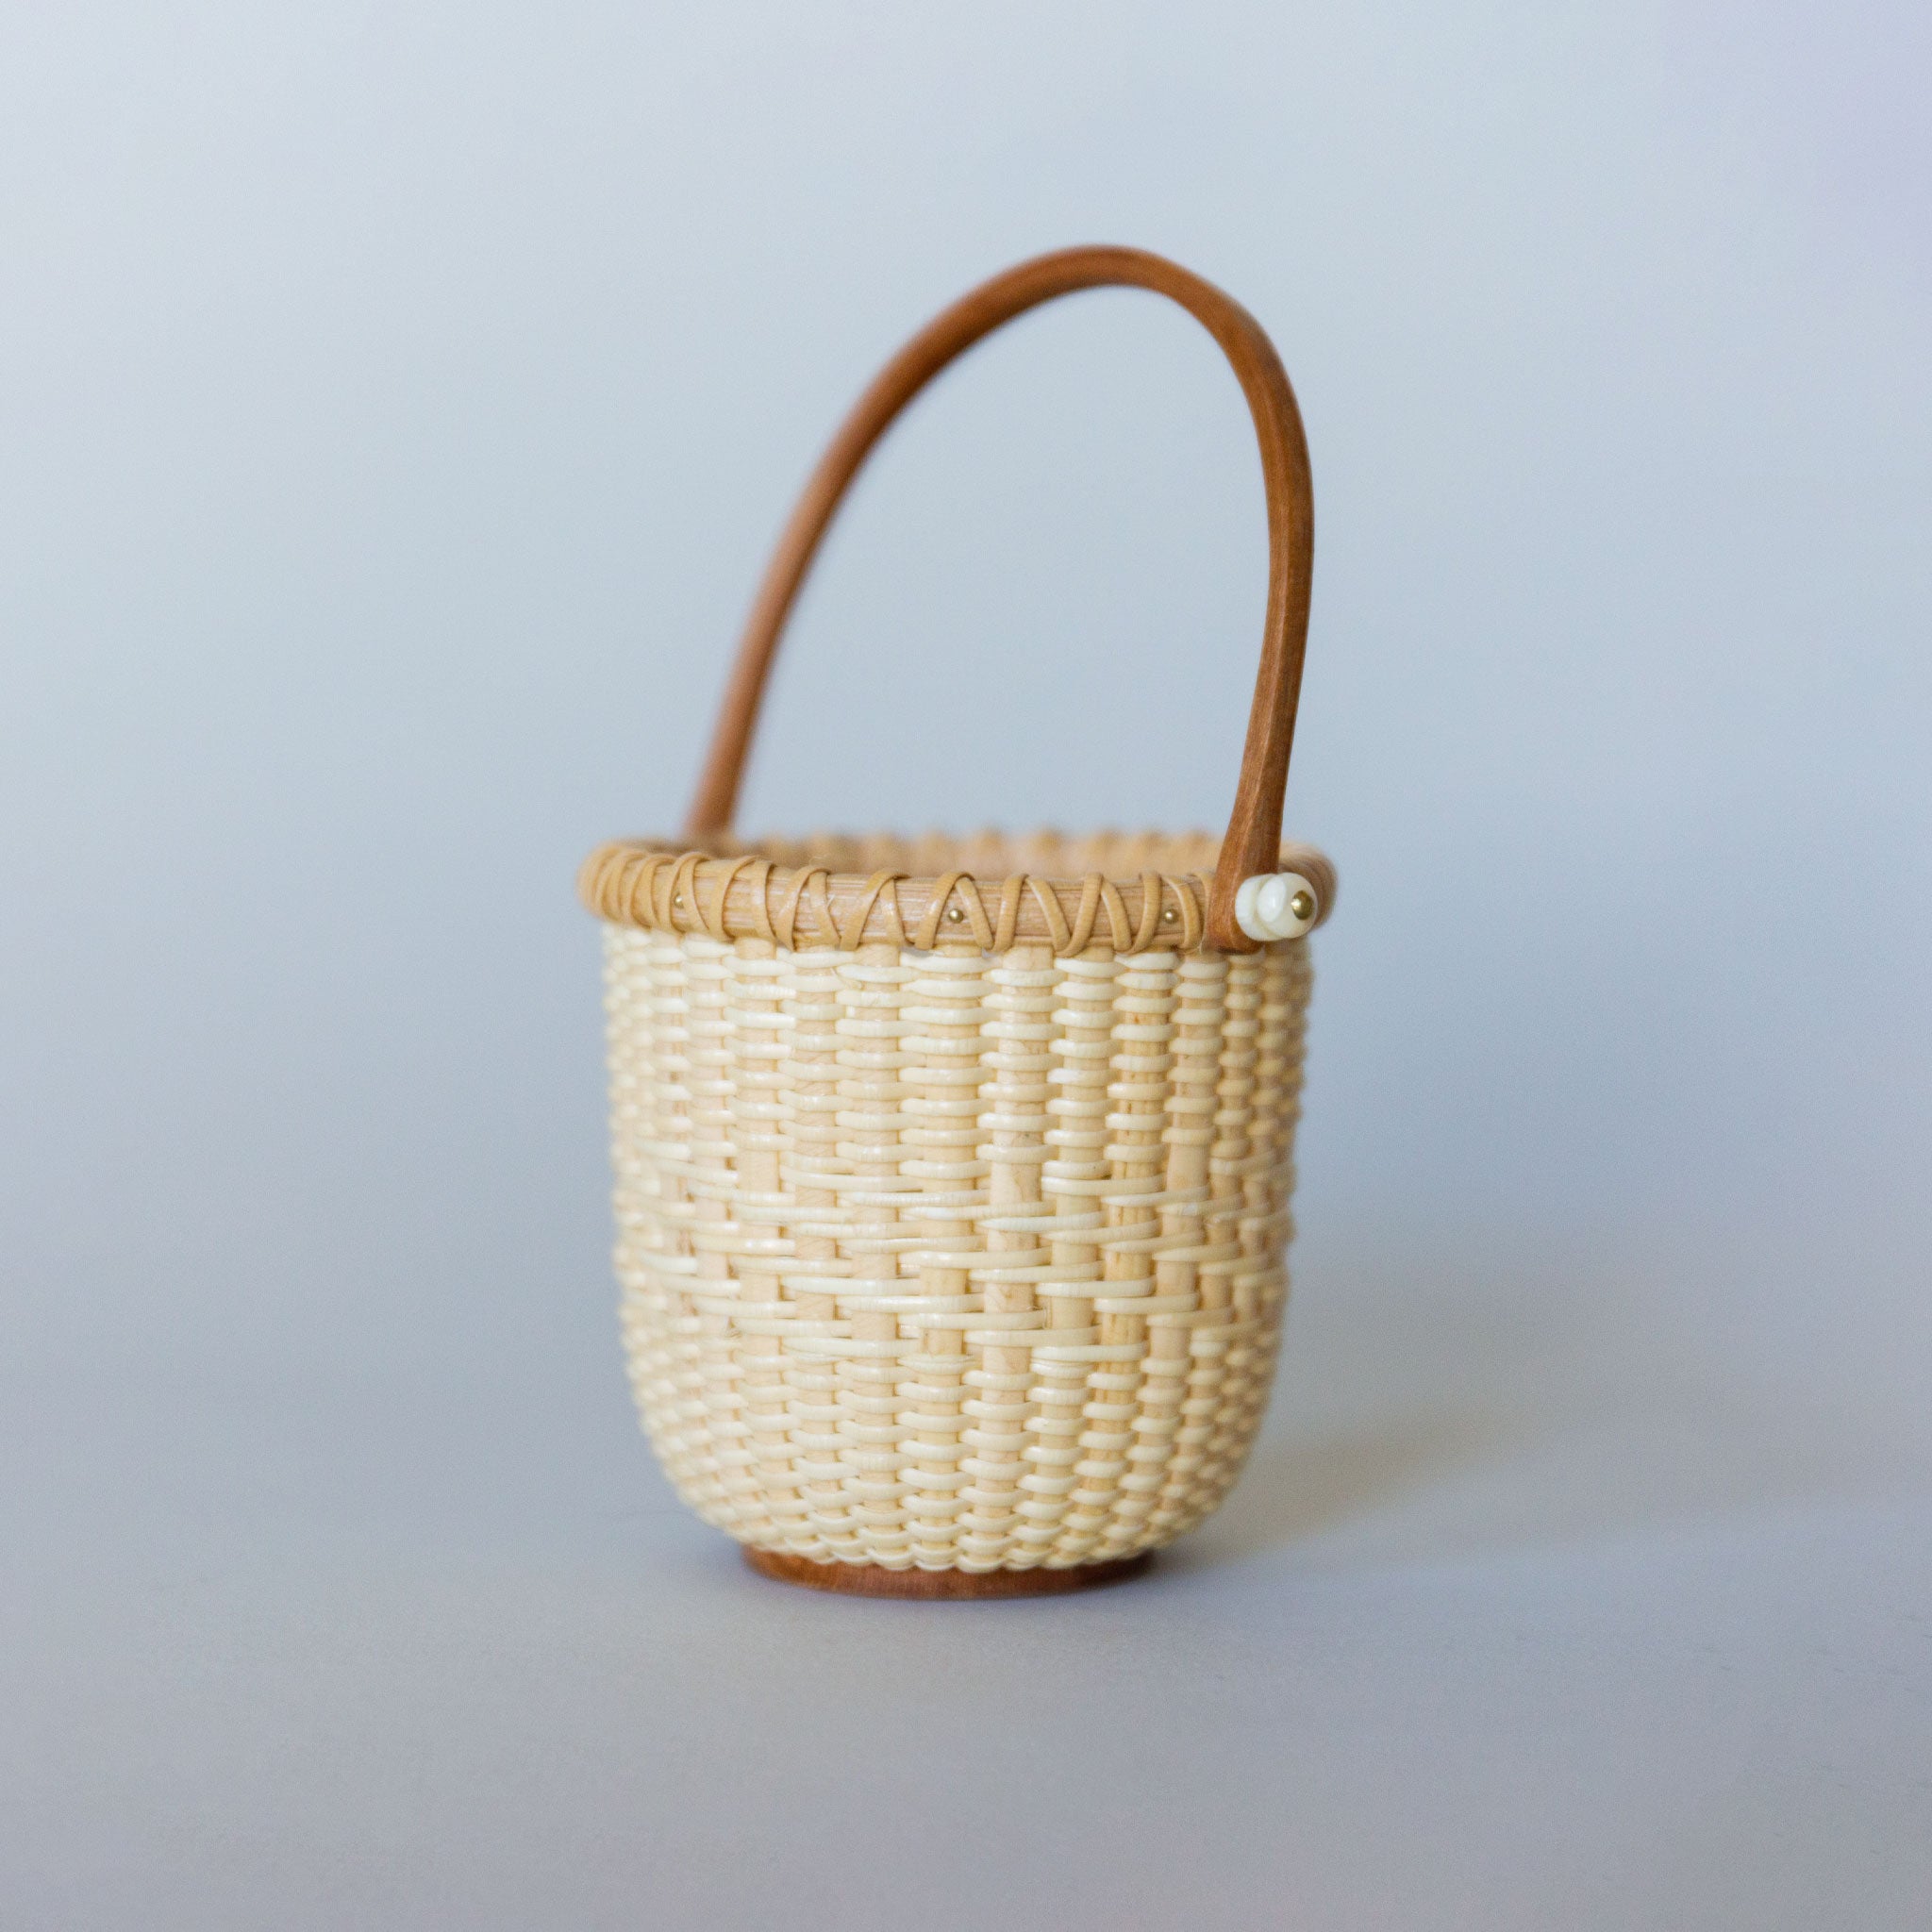 Intricate Weave Lightship Basket | Dale Rutherford